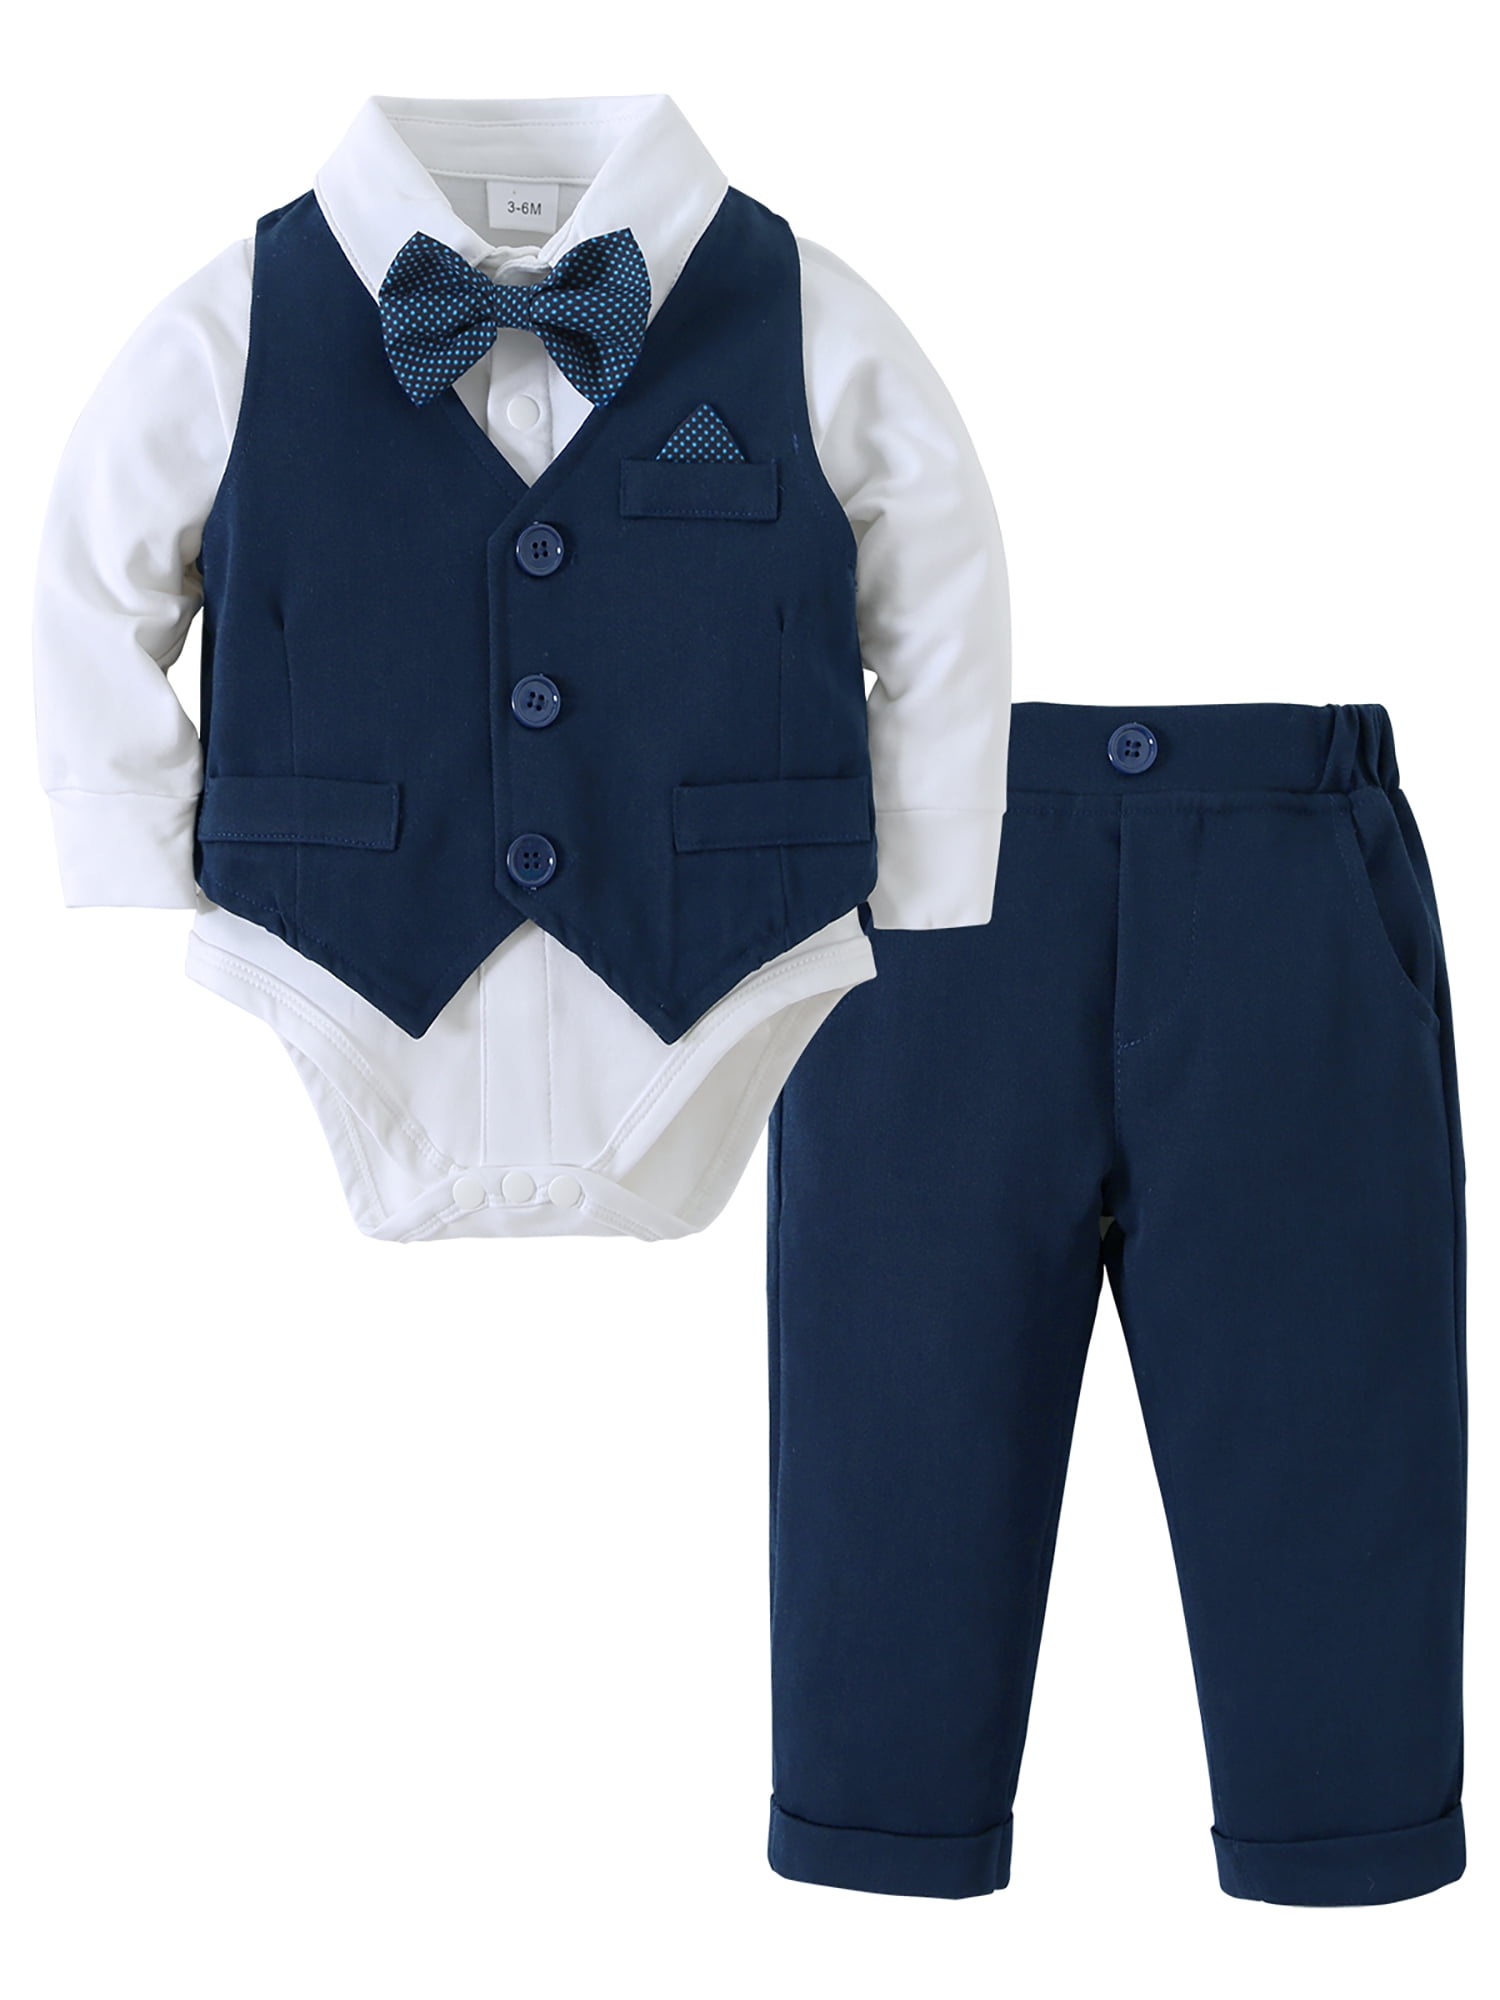 CARETOO Baby Boy Clothes Suit Toddler Outfits 4PC Gentleman Dress ...